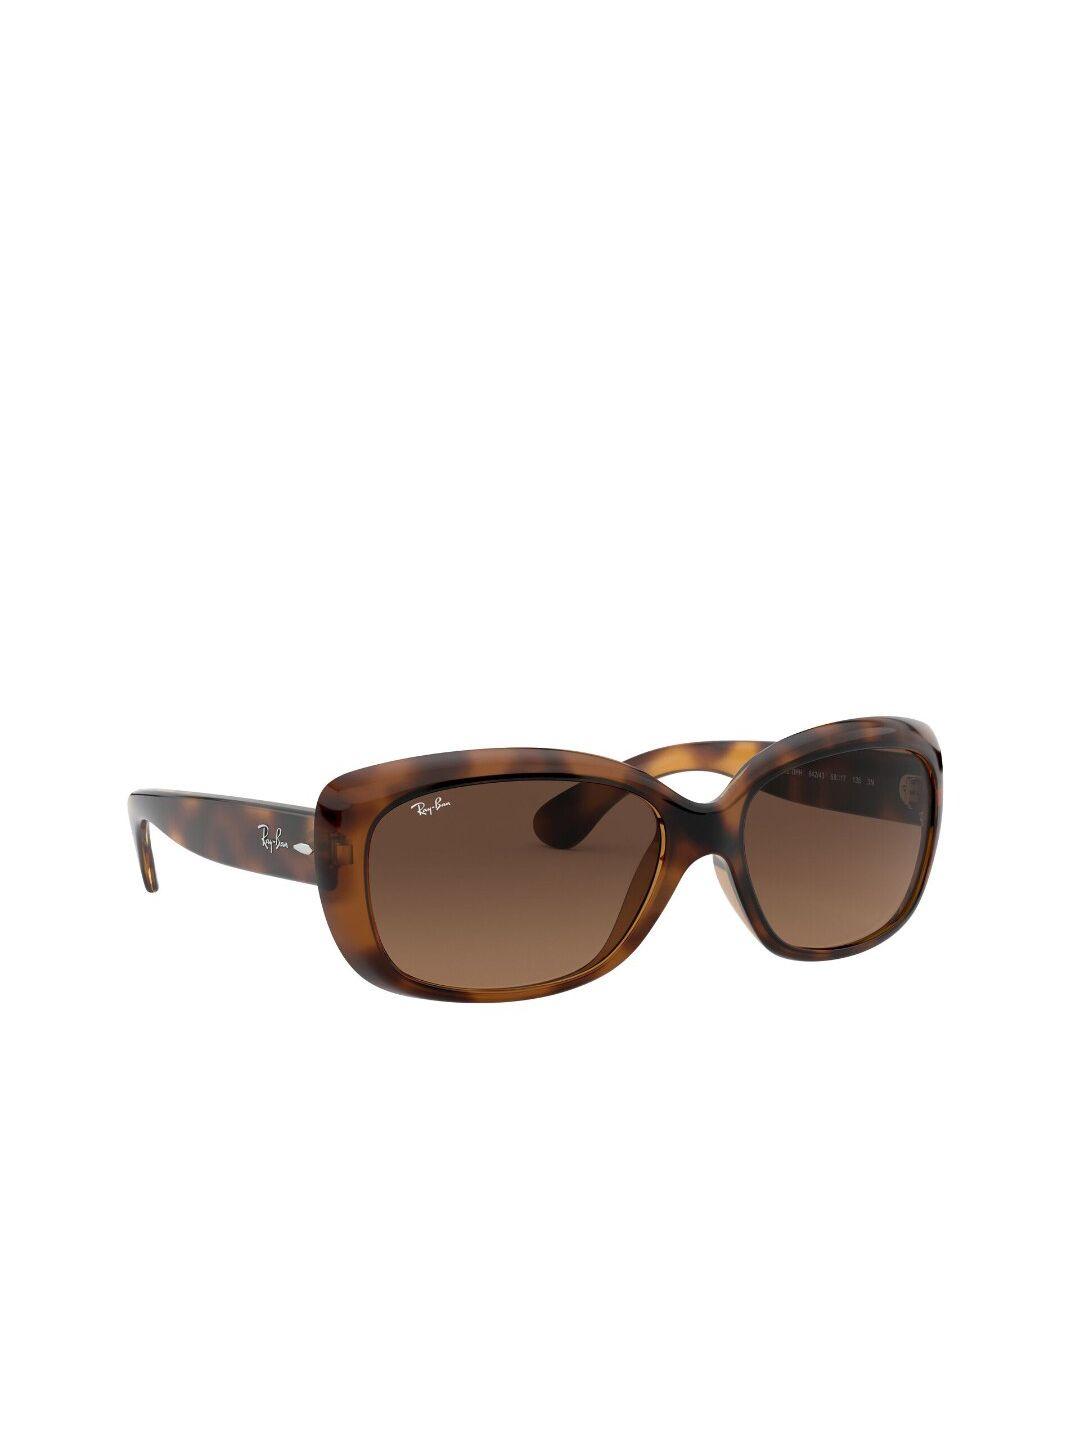 ray-ban-women-butterfly-sunglasses-with-polarised-lens-8056597210836